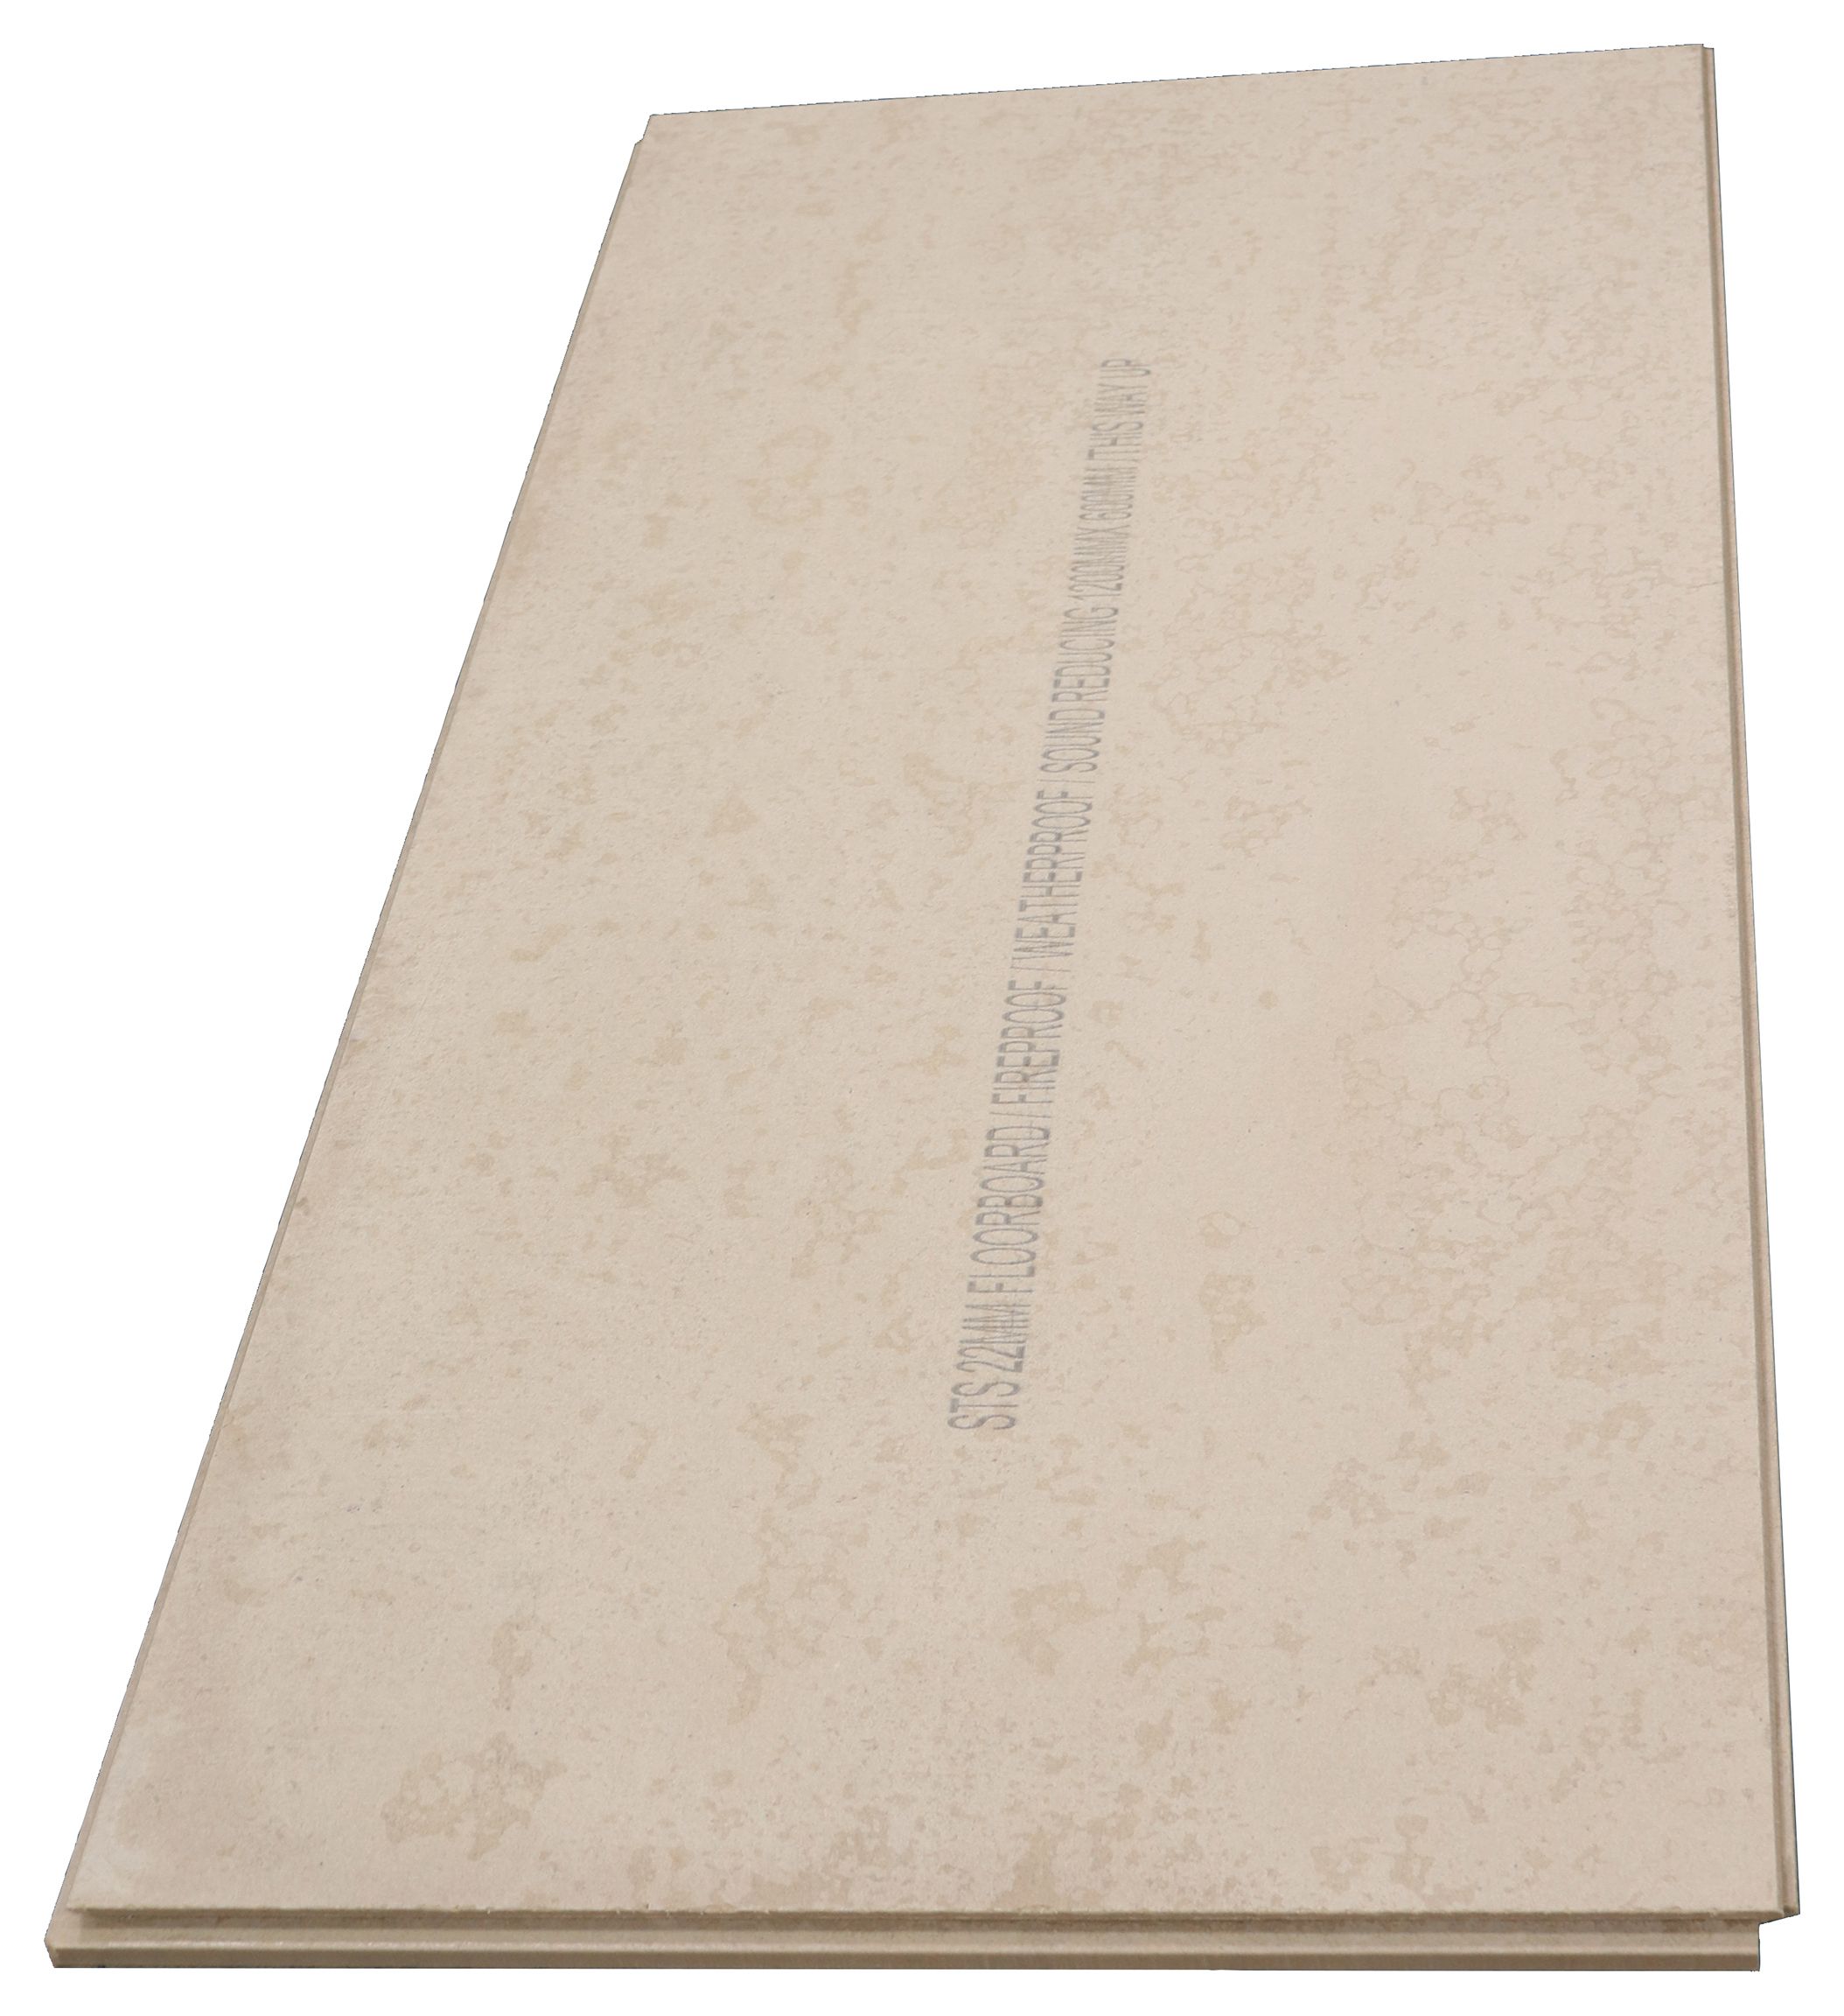 Image of STS NoMorePly TG4 Tile Backer Floor Board 1200 x 600 x 22mm - Pack of 20